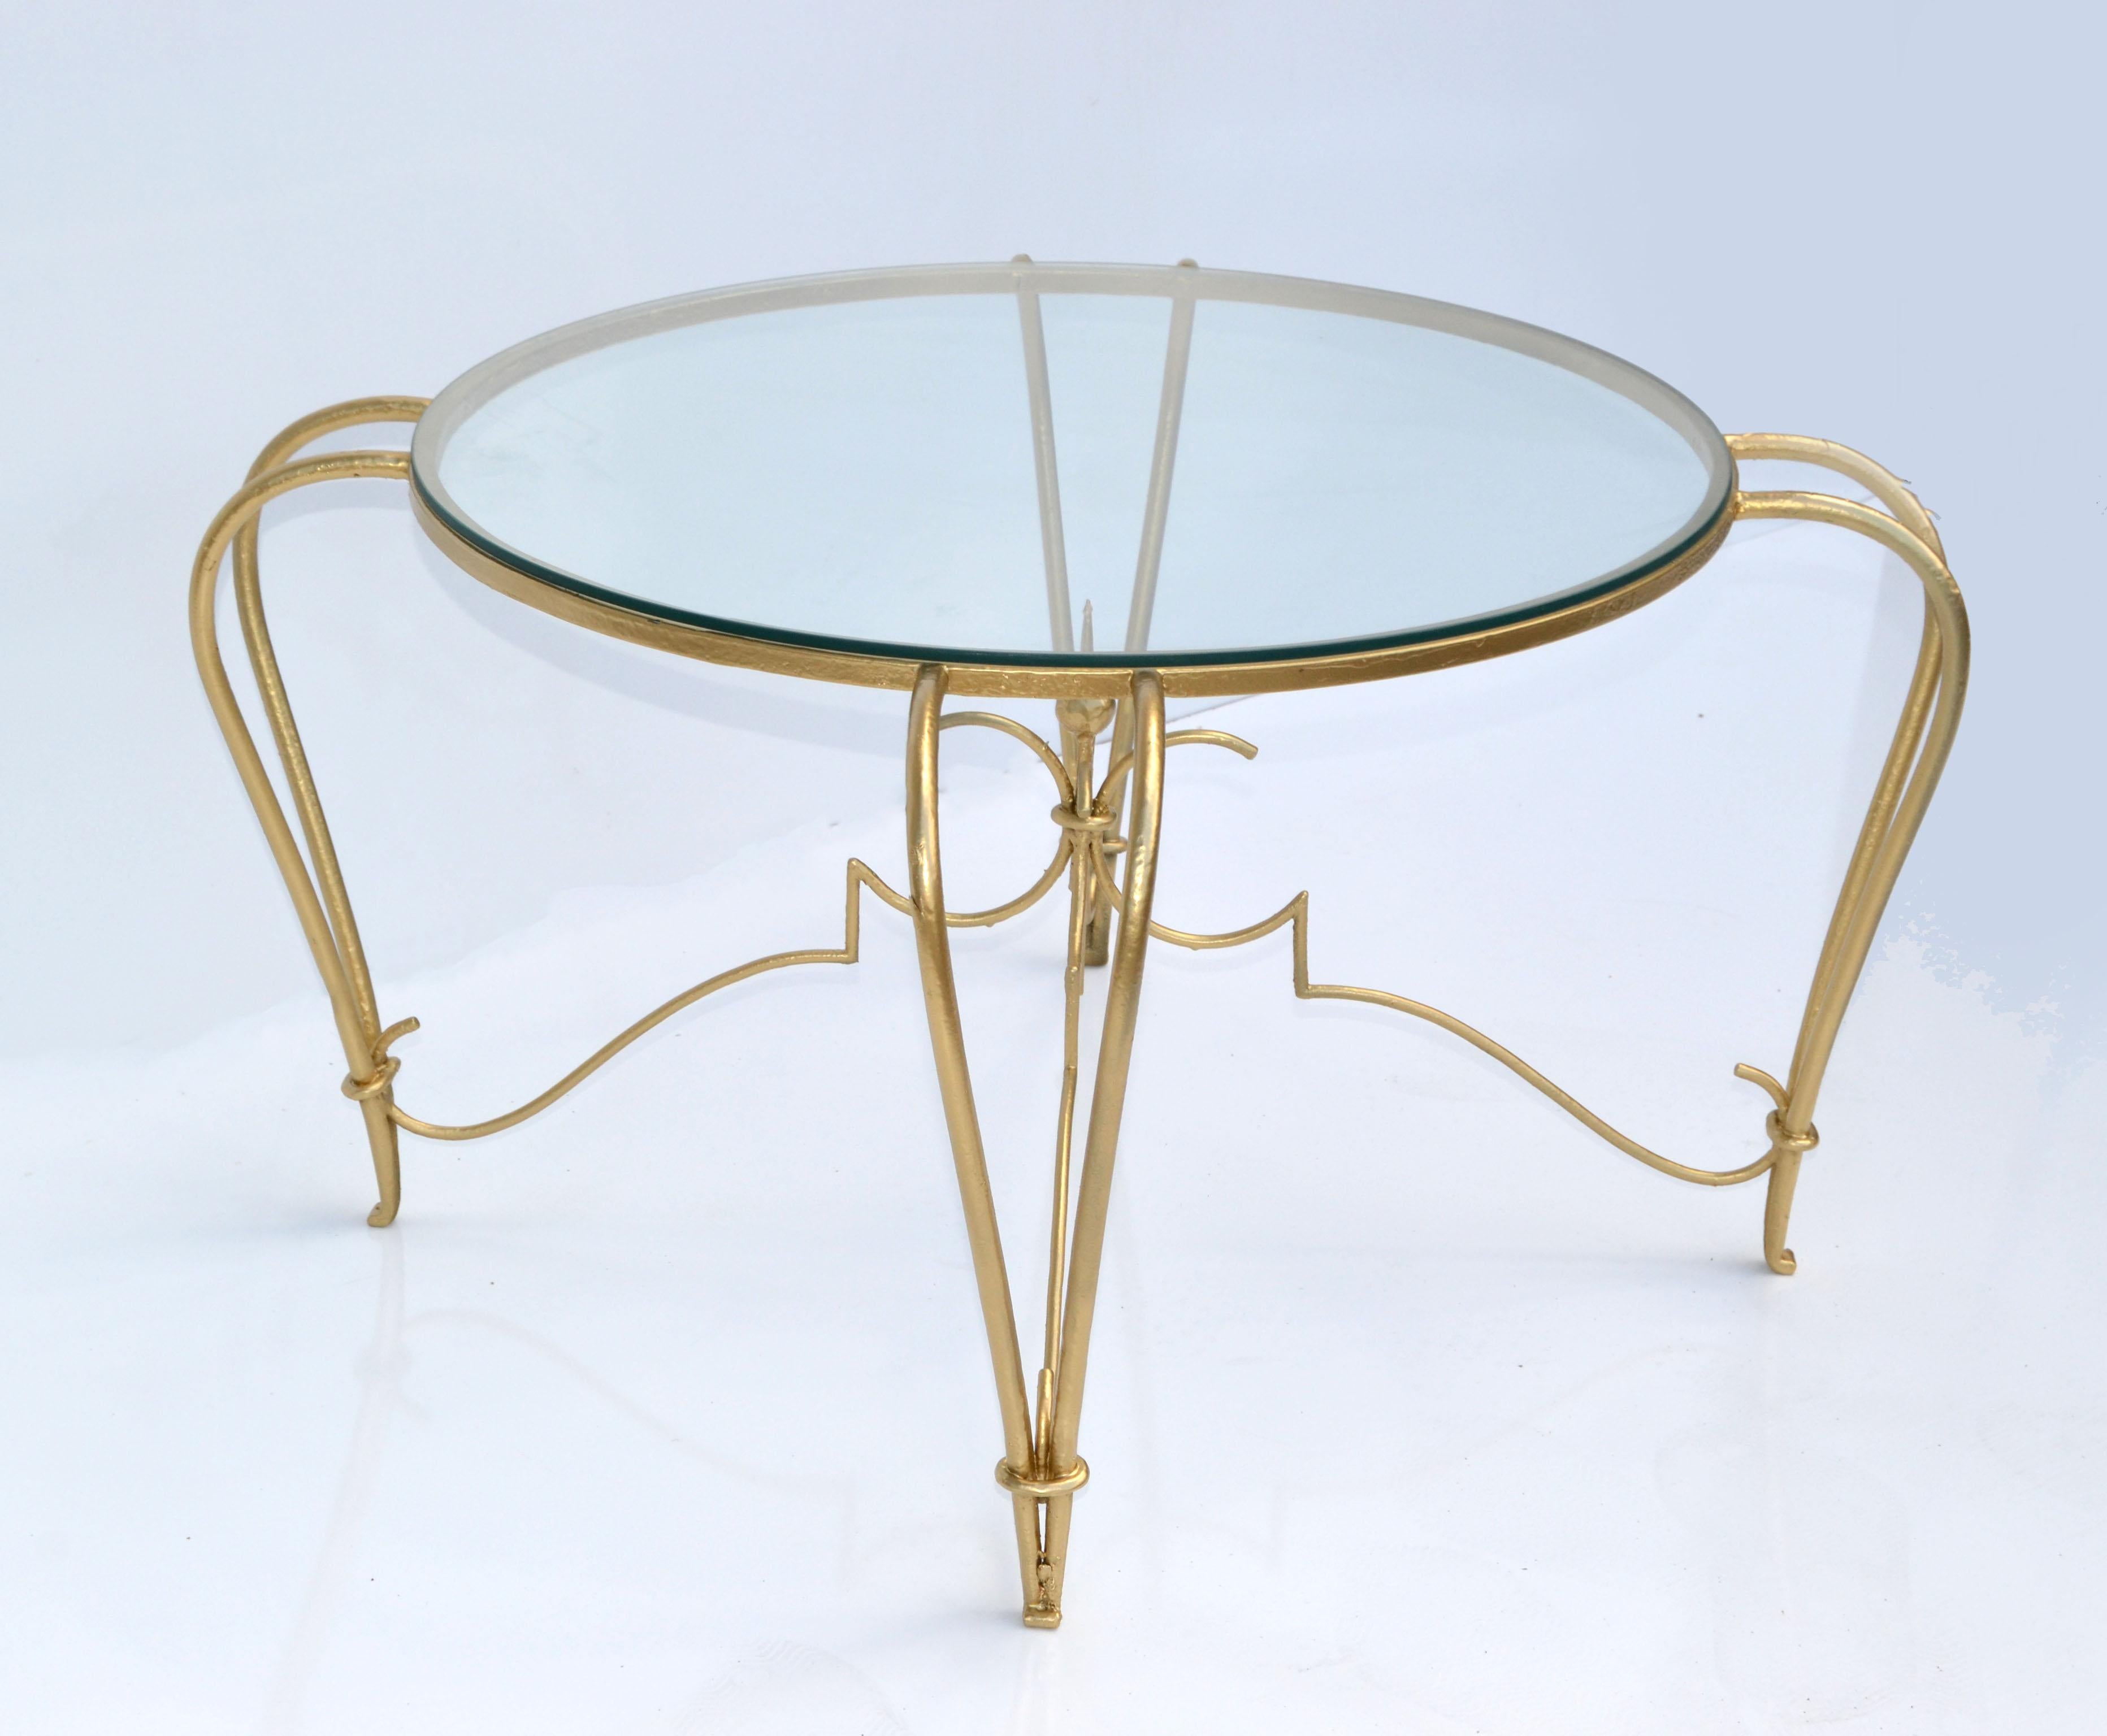 French Art Deco Gold Finish Round Wrought Iron & Glass Top Cocktail Table, France, 1950 For Sale